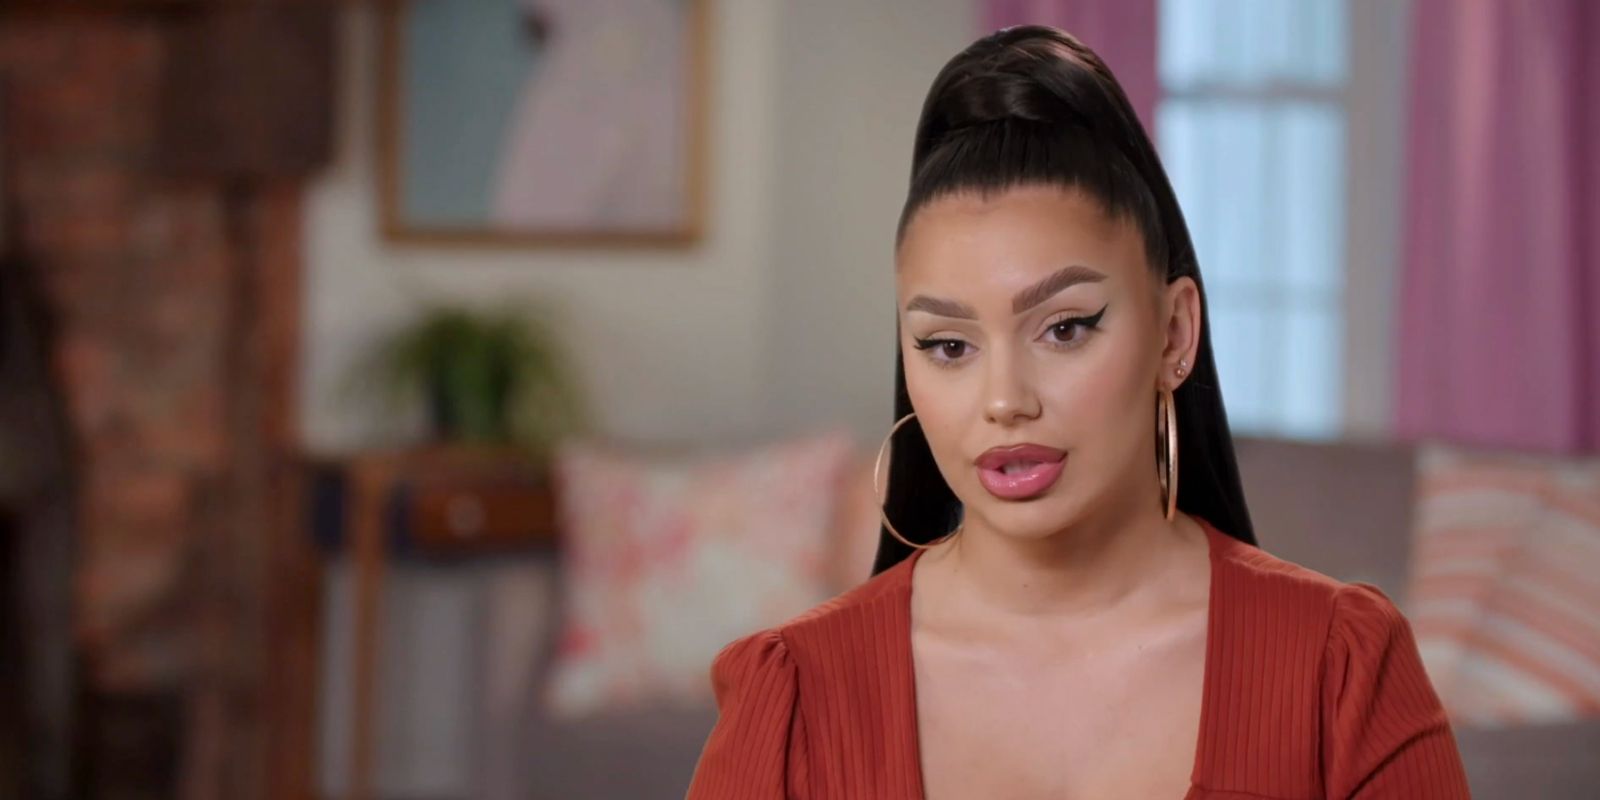 Miona Bell 90 Day Fiance Season 9 confessional wearing brown top high pony